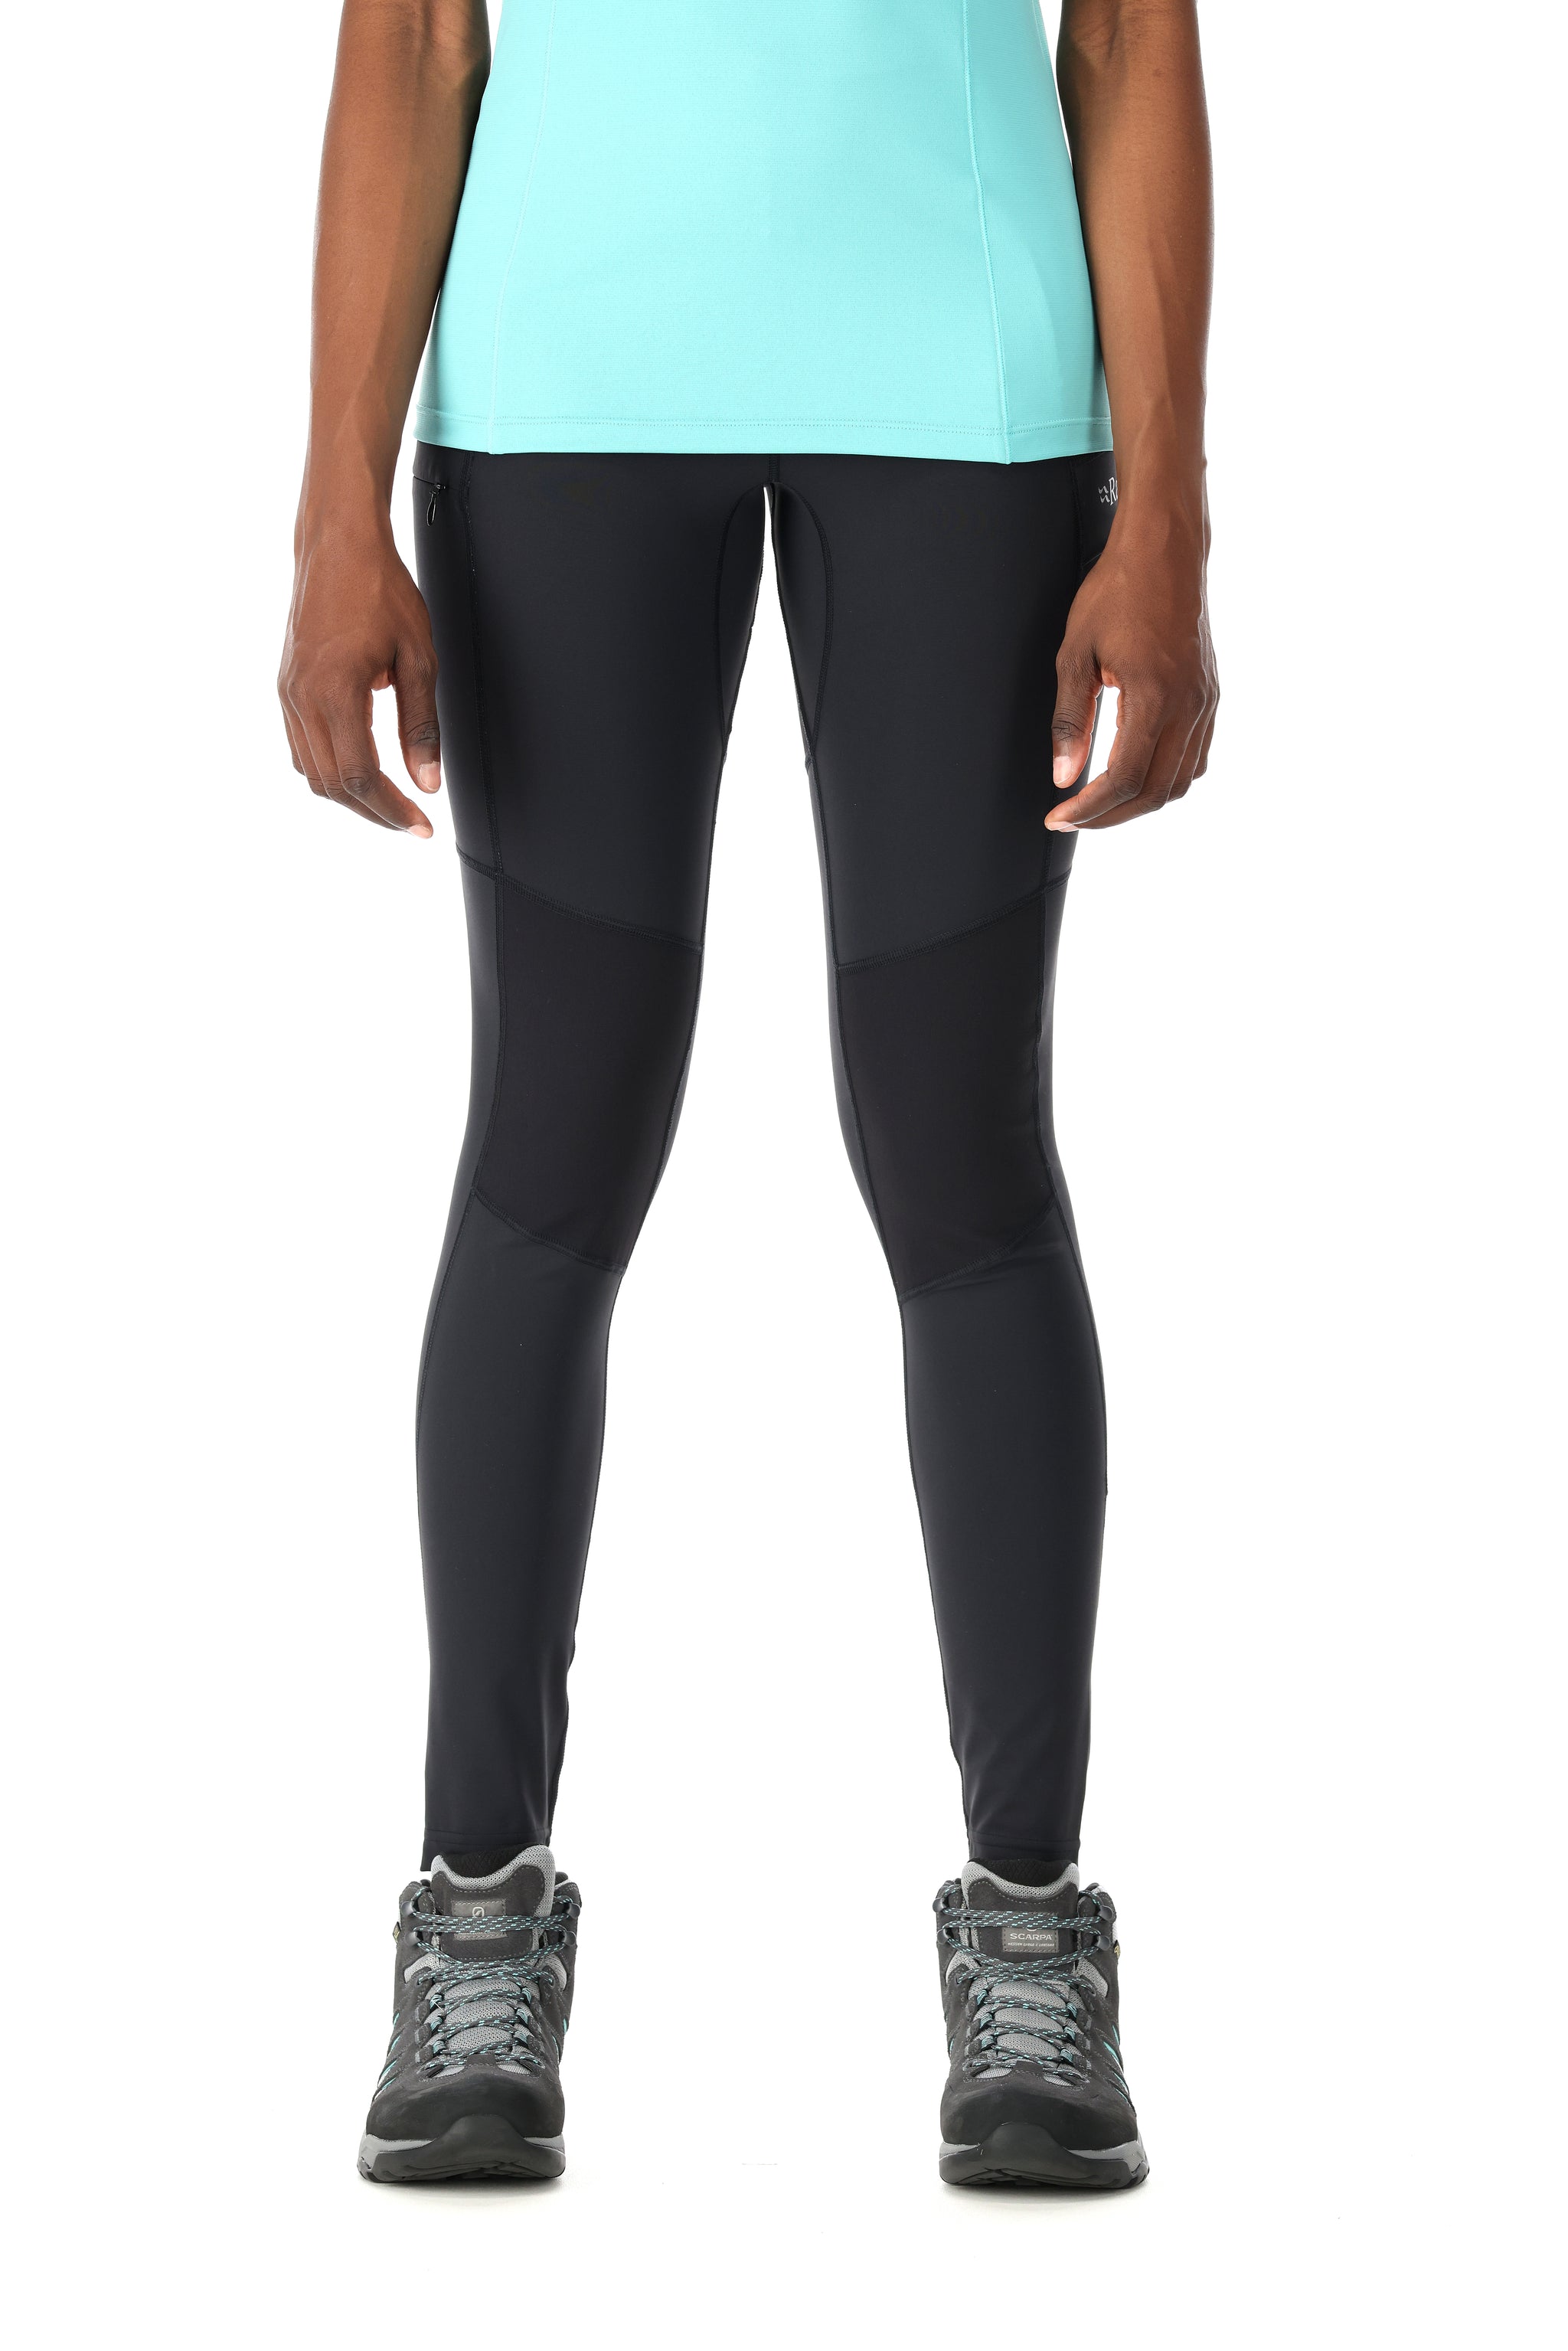 Rab Horizon Tights (Womens) - outfittersstore.nz